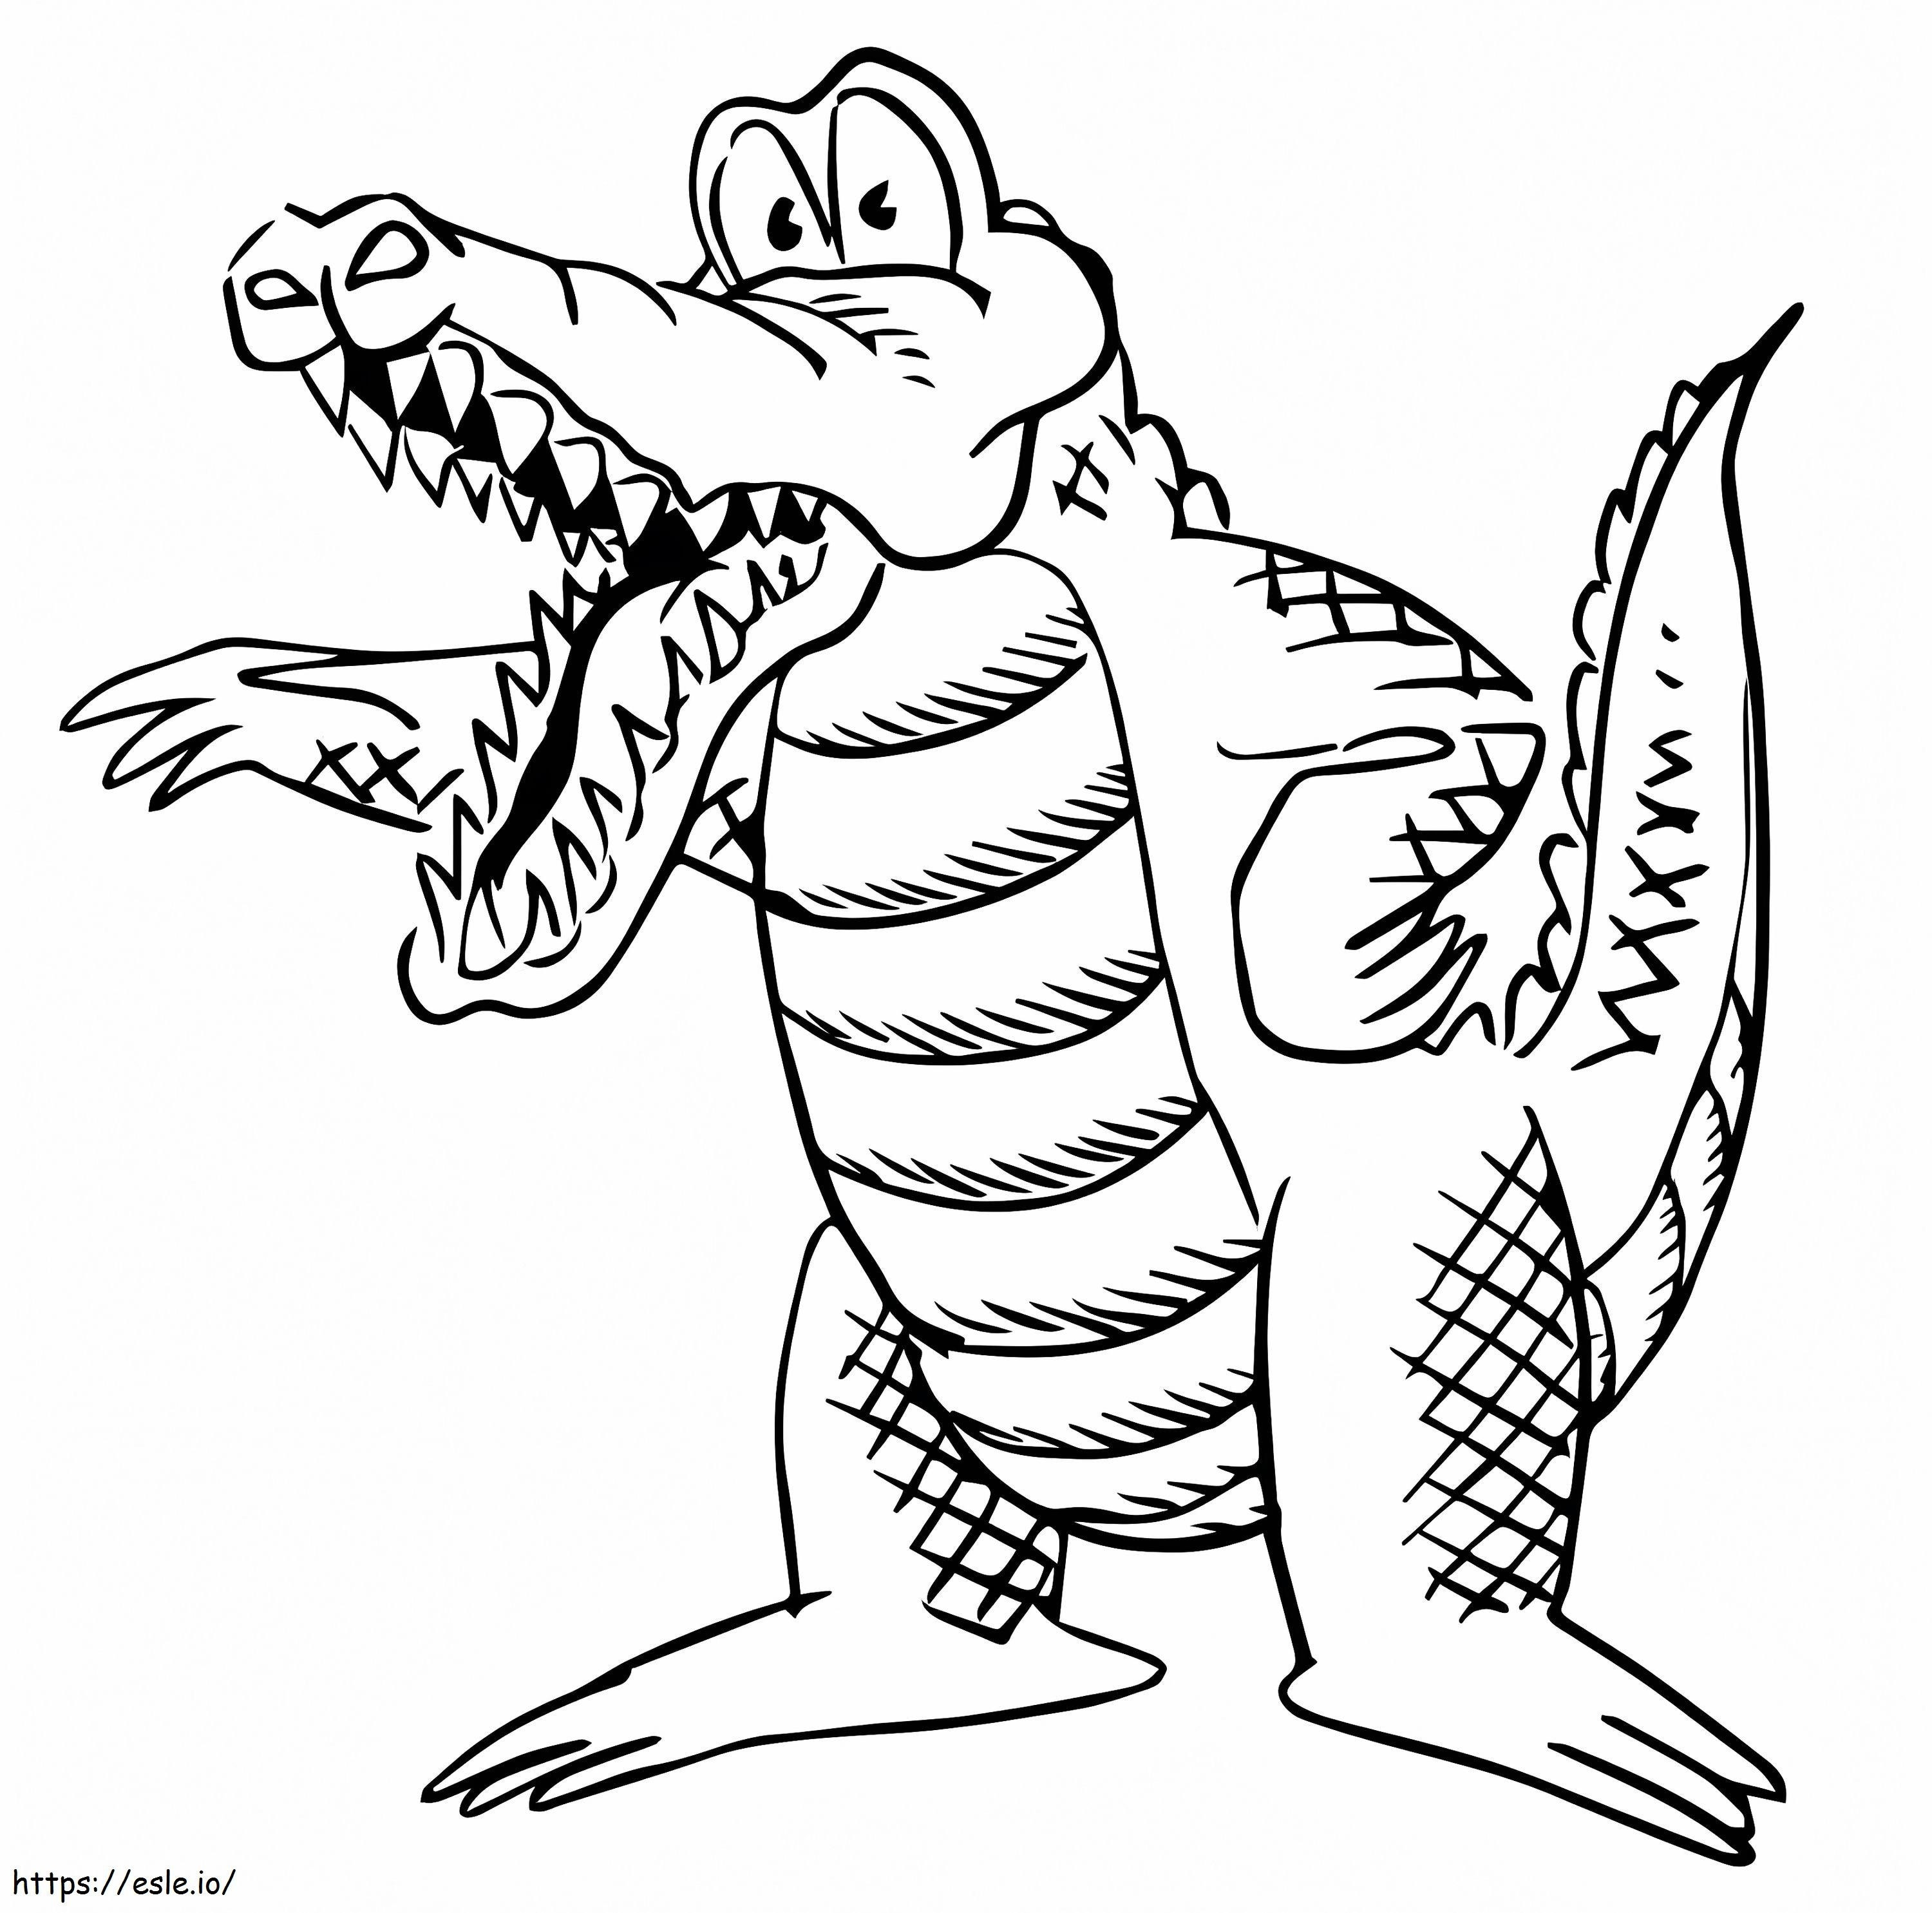 Angry Cartoon Alligator coloring page